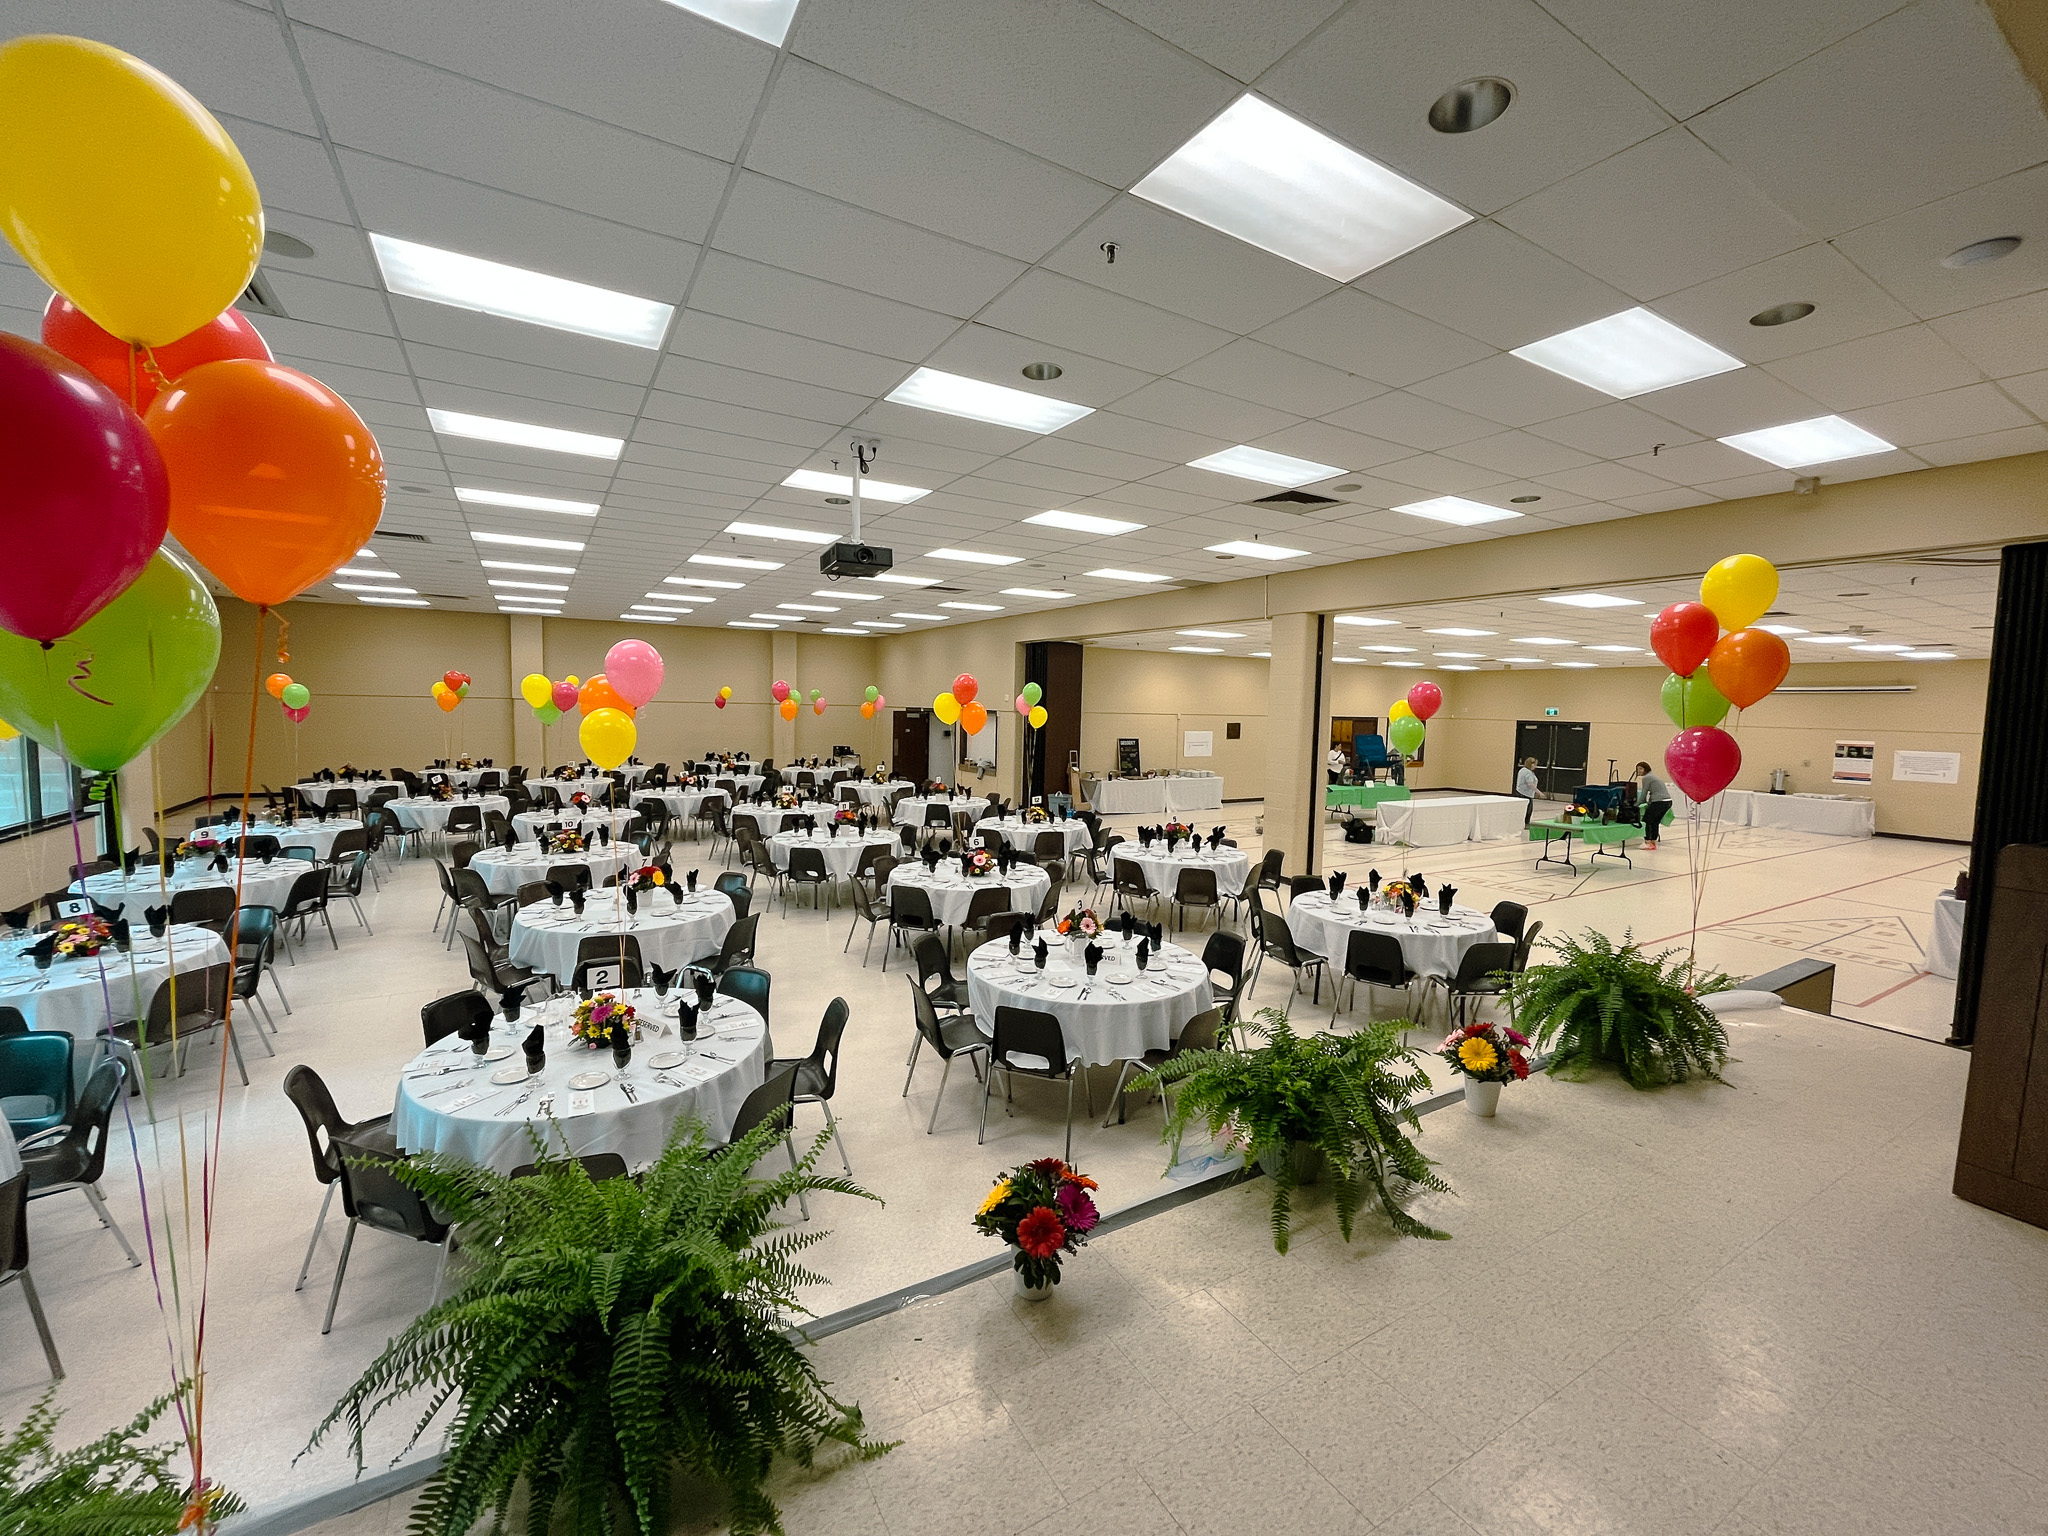 image of Banquet room set with tables chairs and balloons